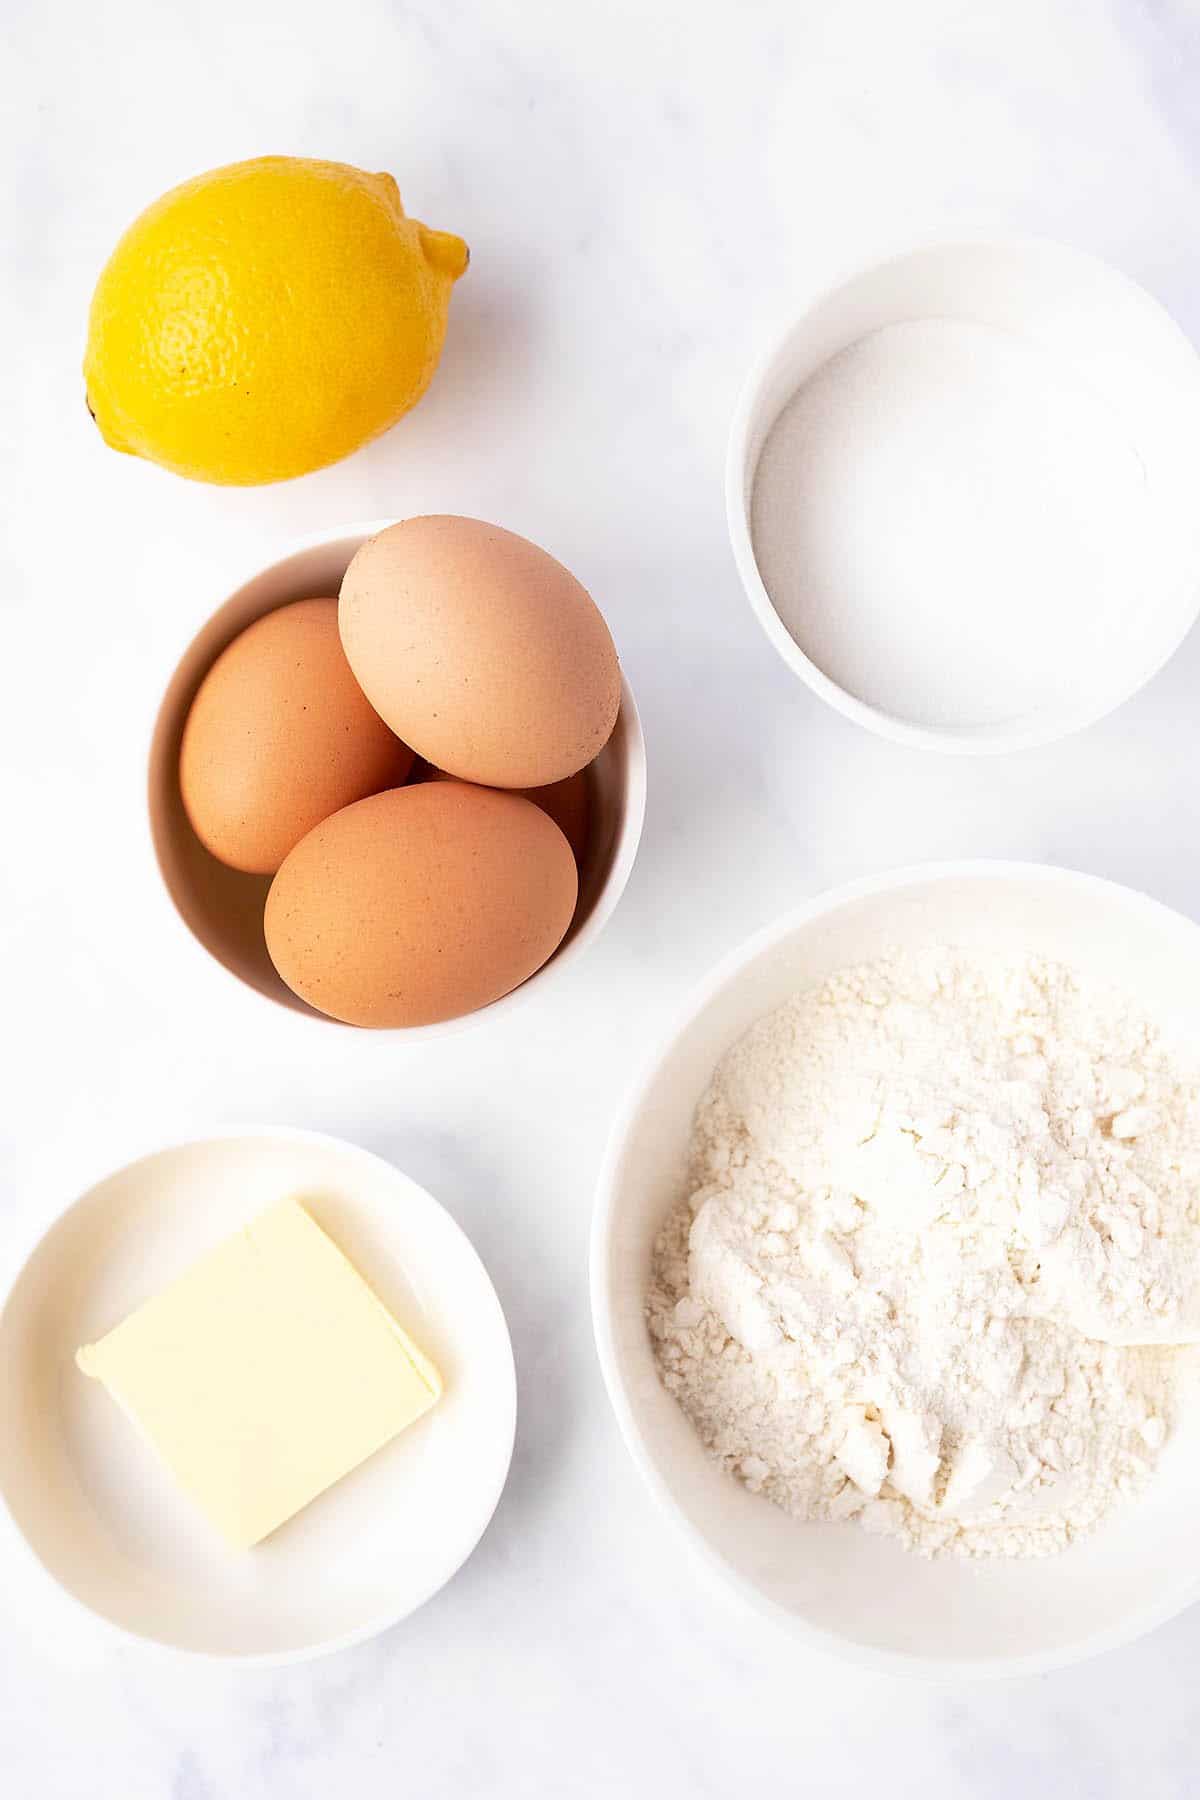 Top view of the ingredients needed to make a genoise sponge.